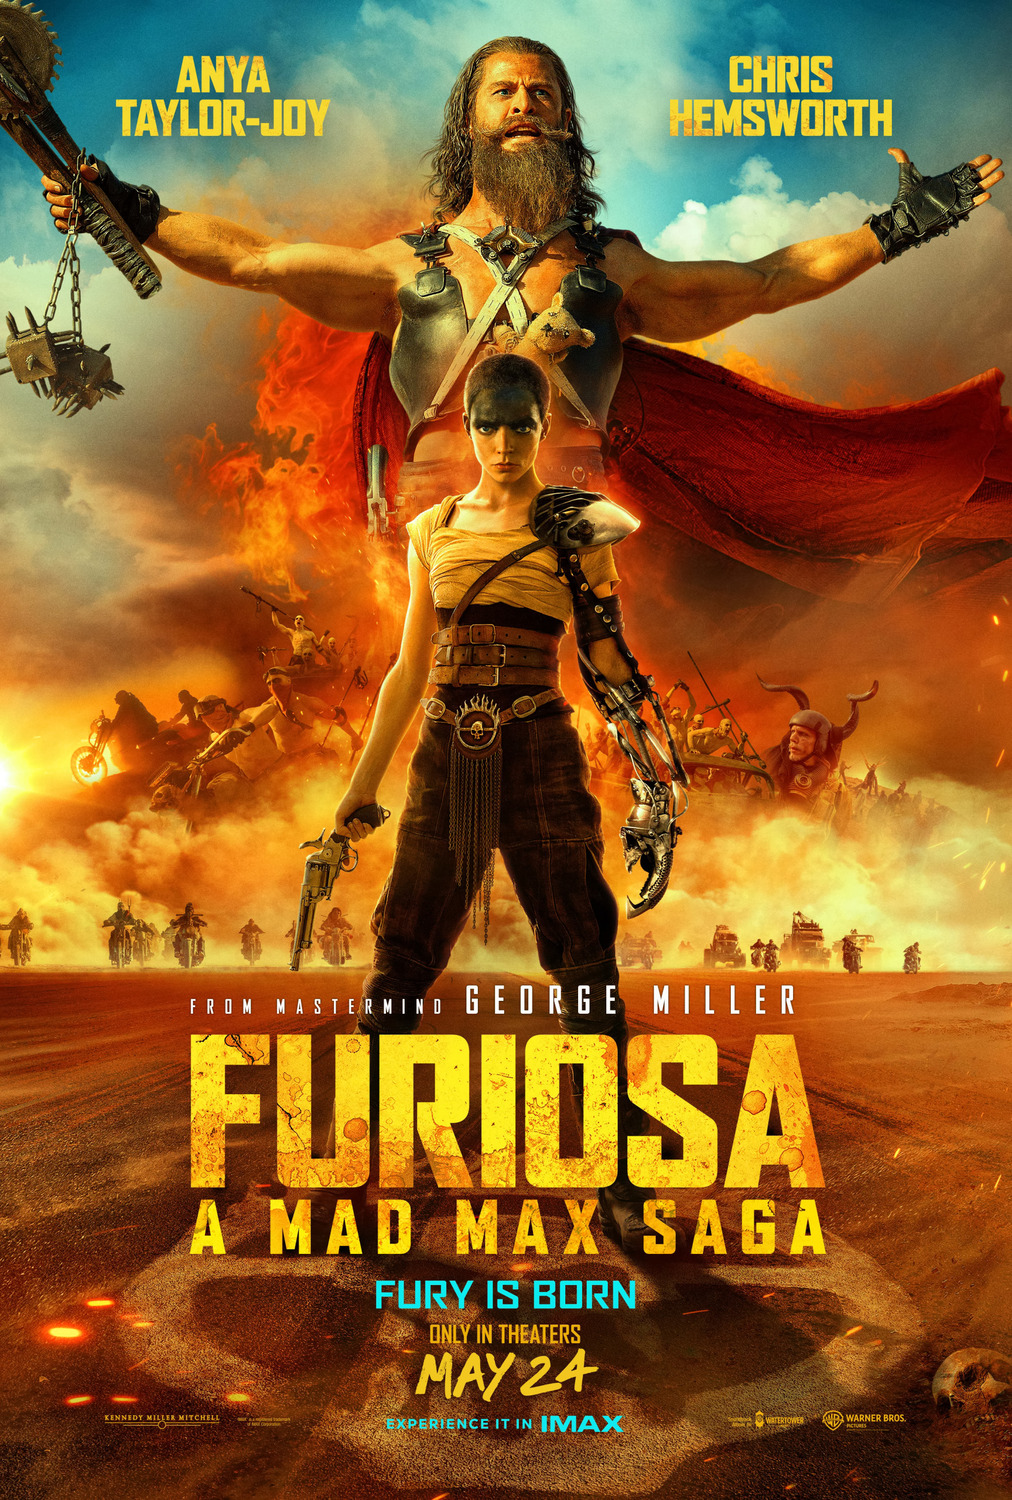 Set against a flamed sky, we see the outstretched arms of Dementus as Furiosa stands defiantly in the foreground, staring at the viewer.